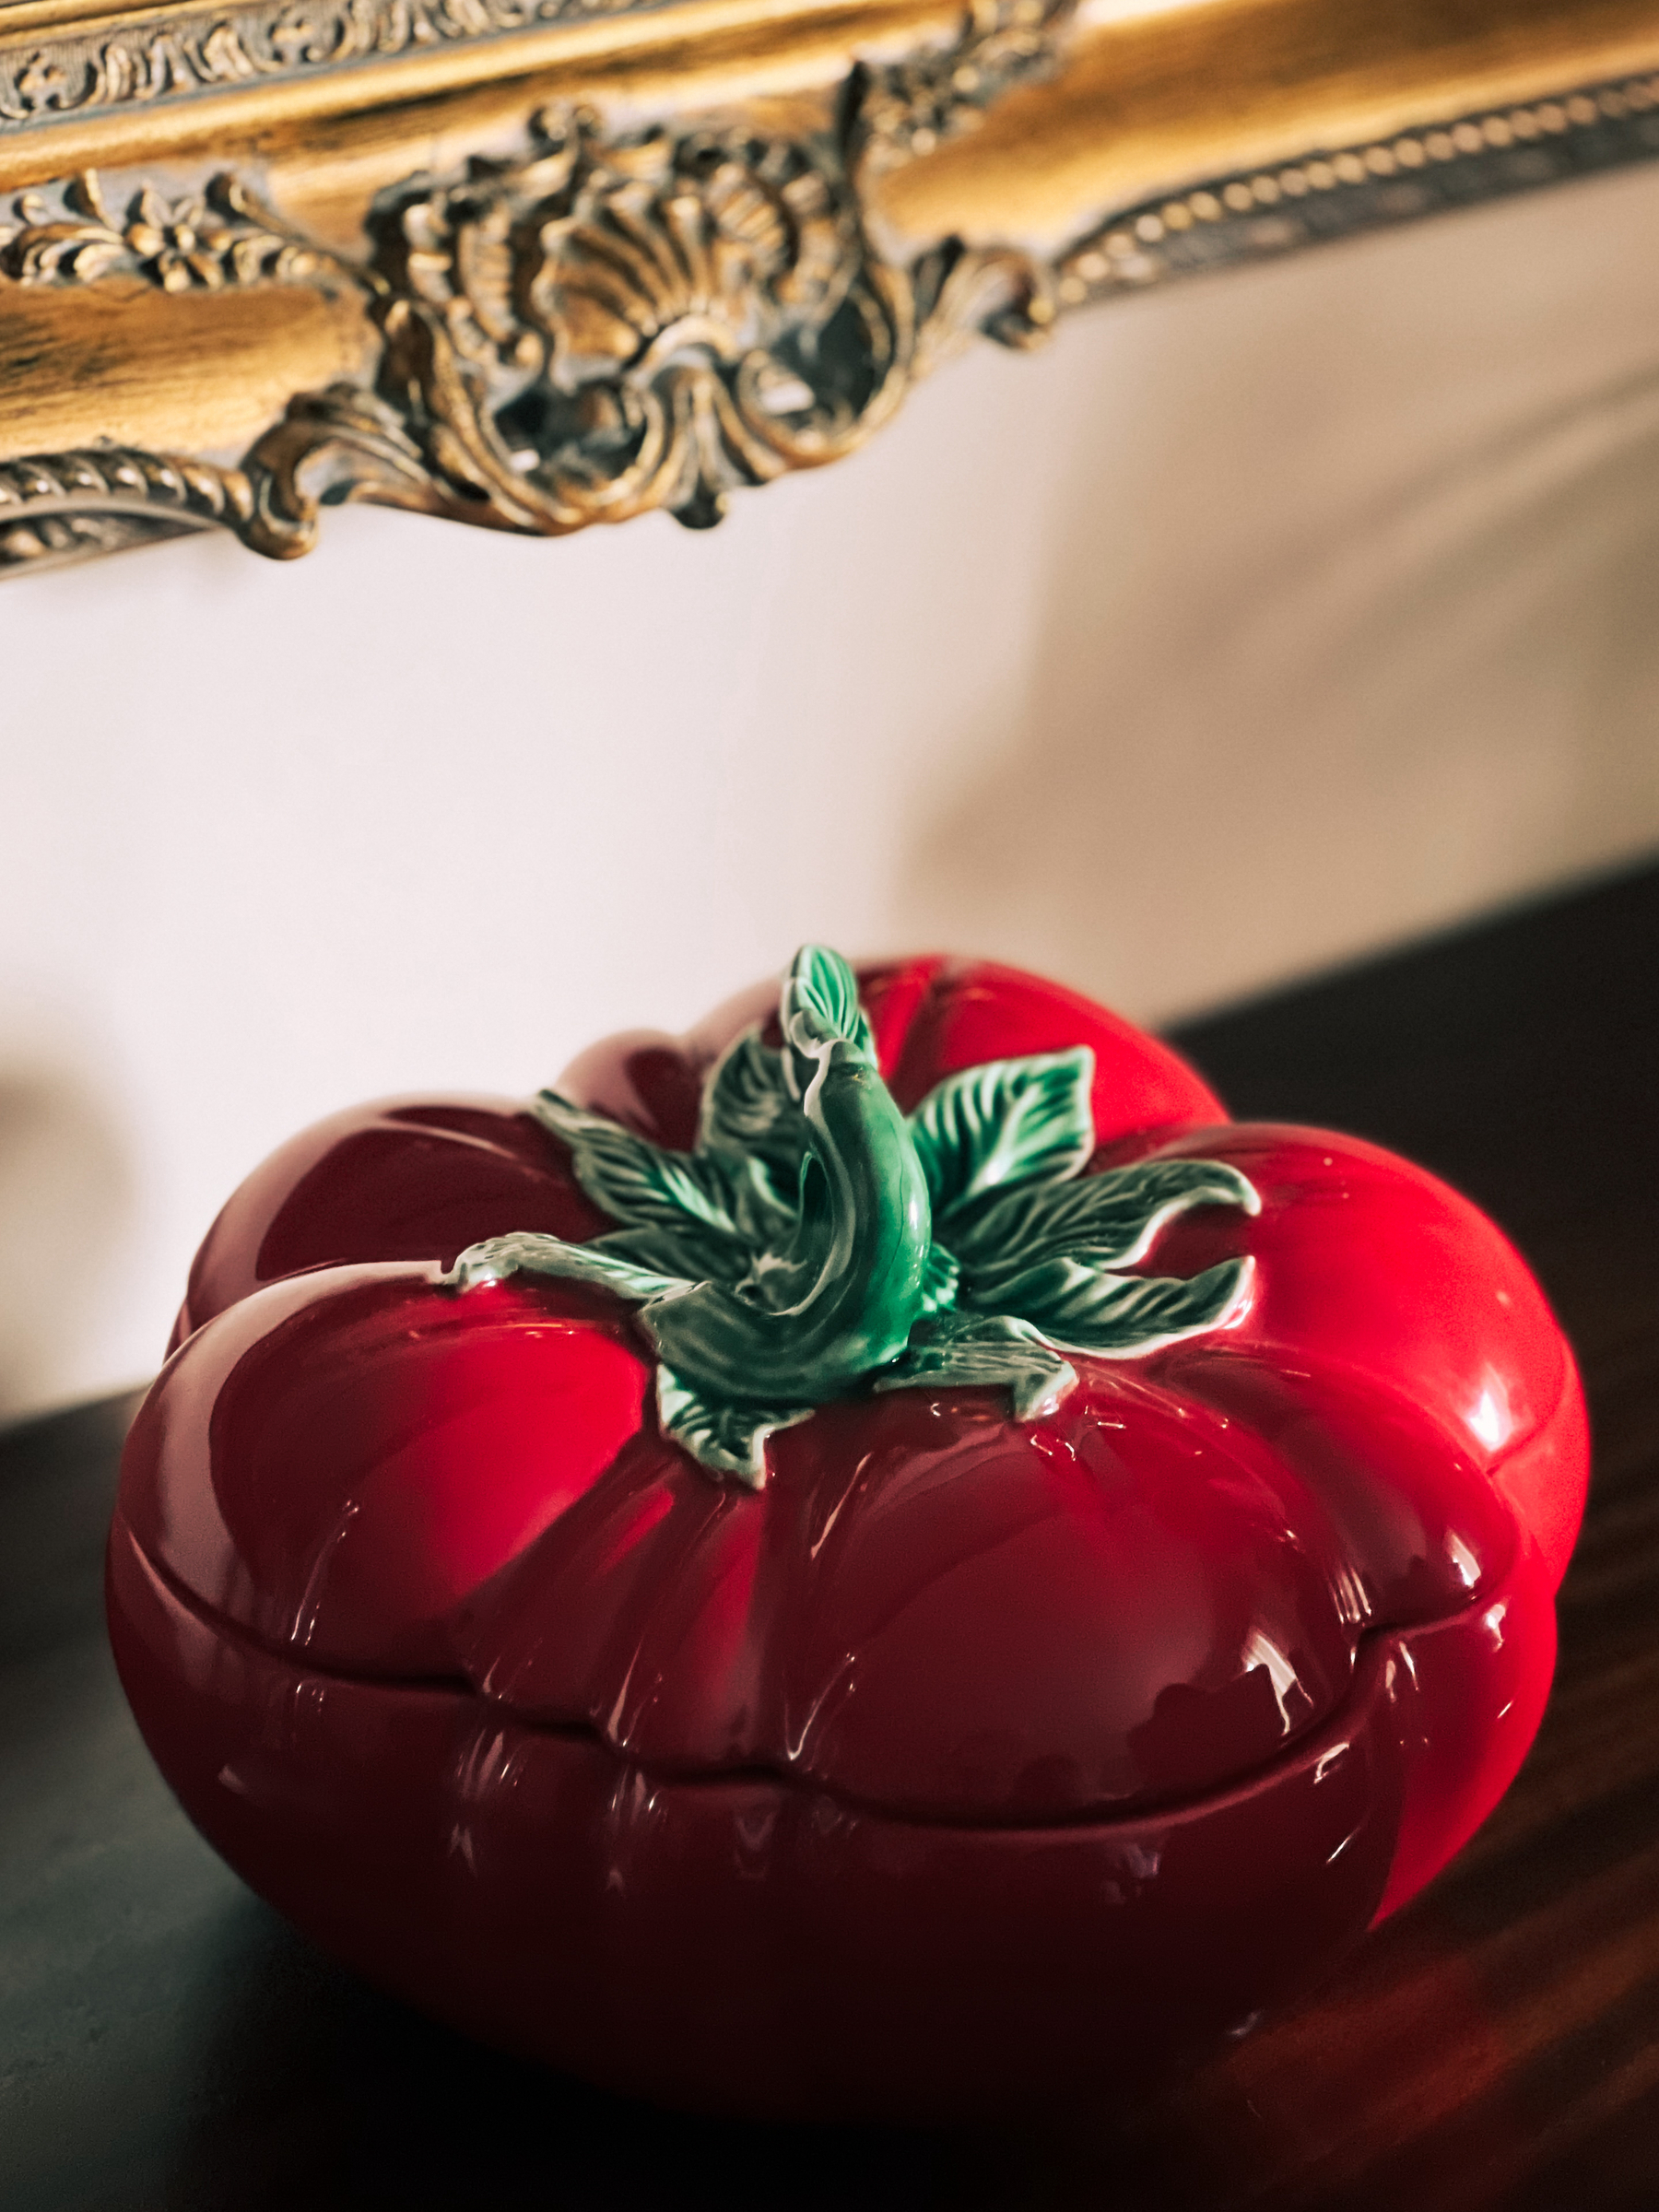 A ceramic container shaped like a red tomato with a green stem sits on a wooden surface against a wall with an ornate gold-framed mirror.